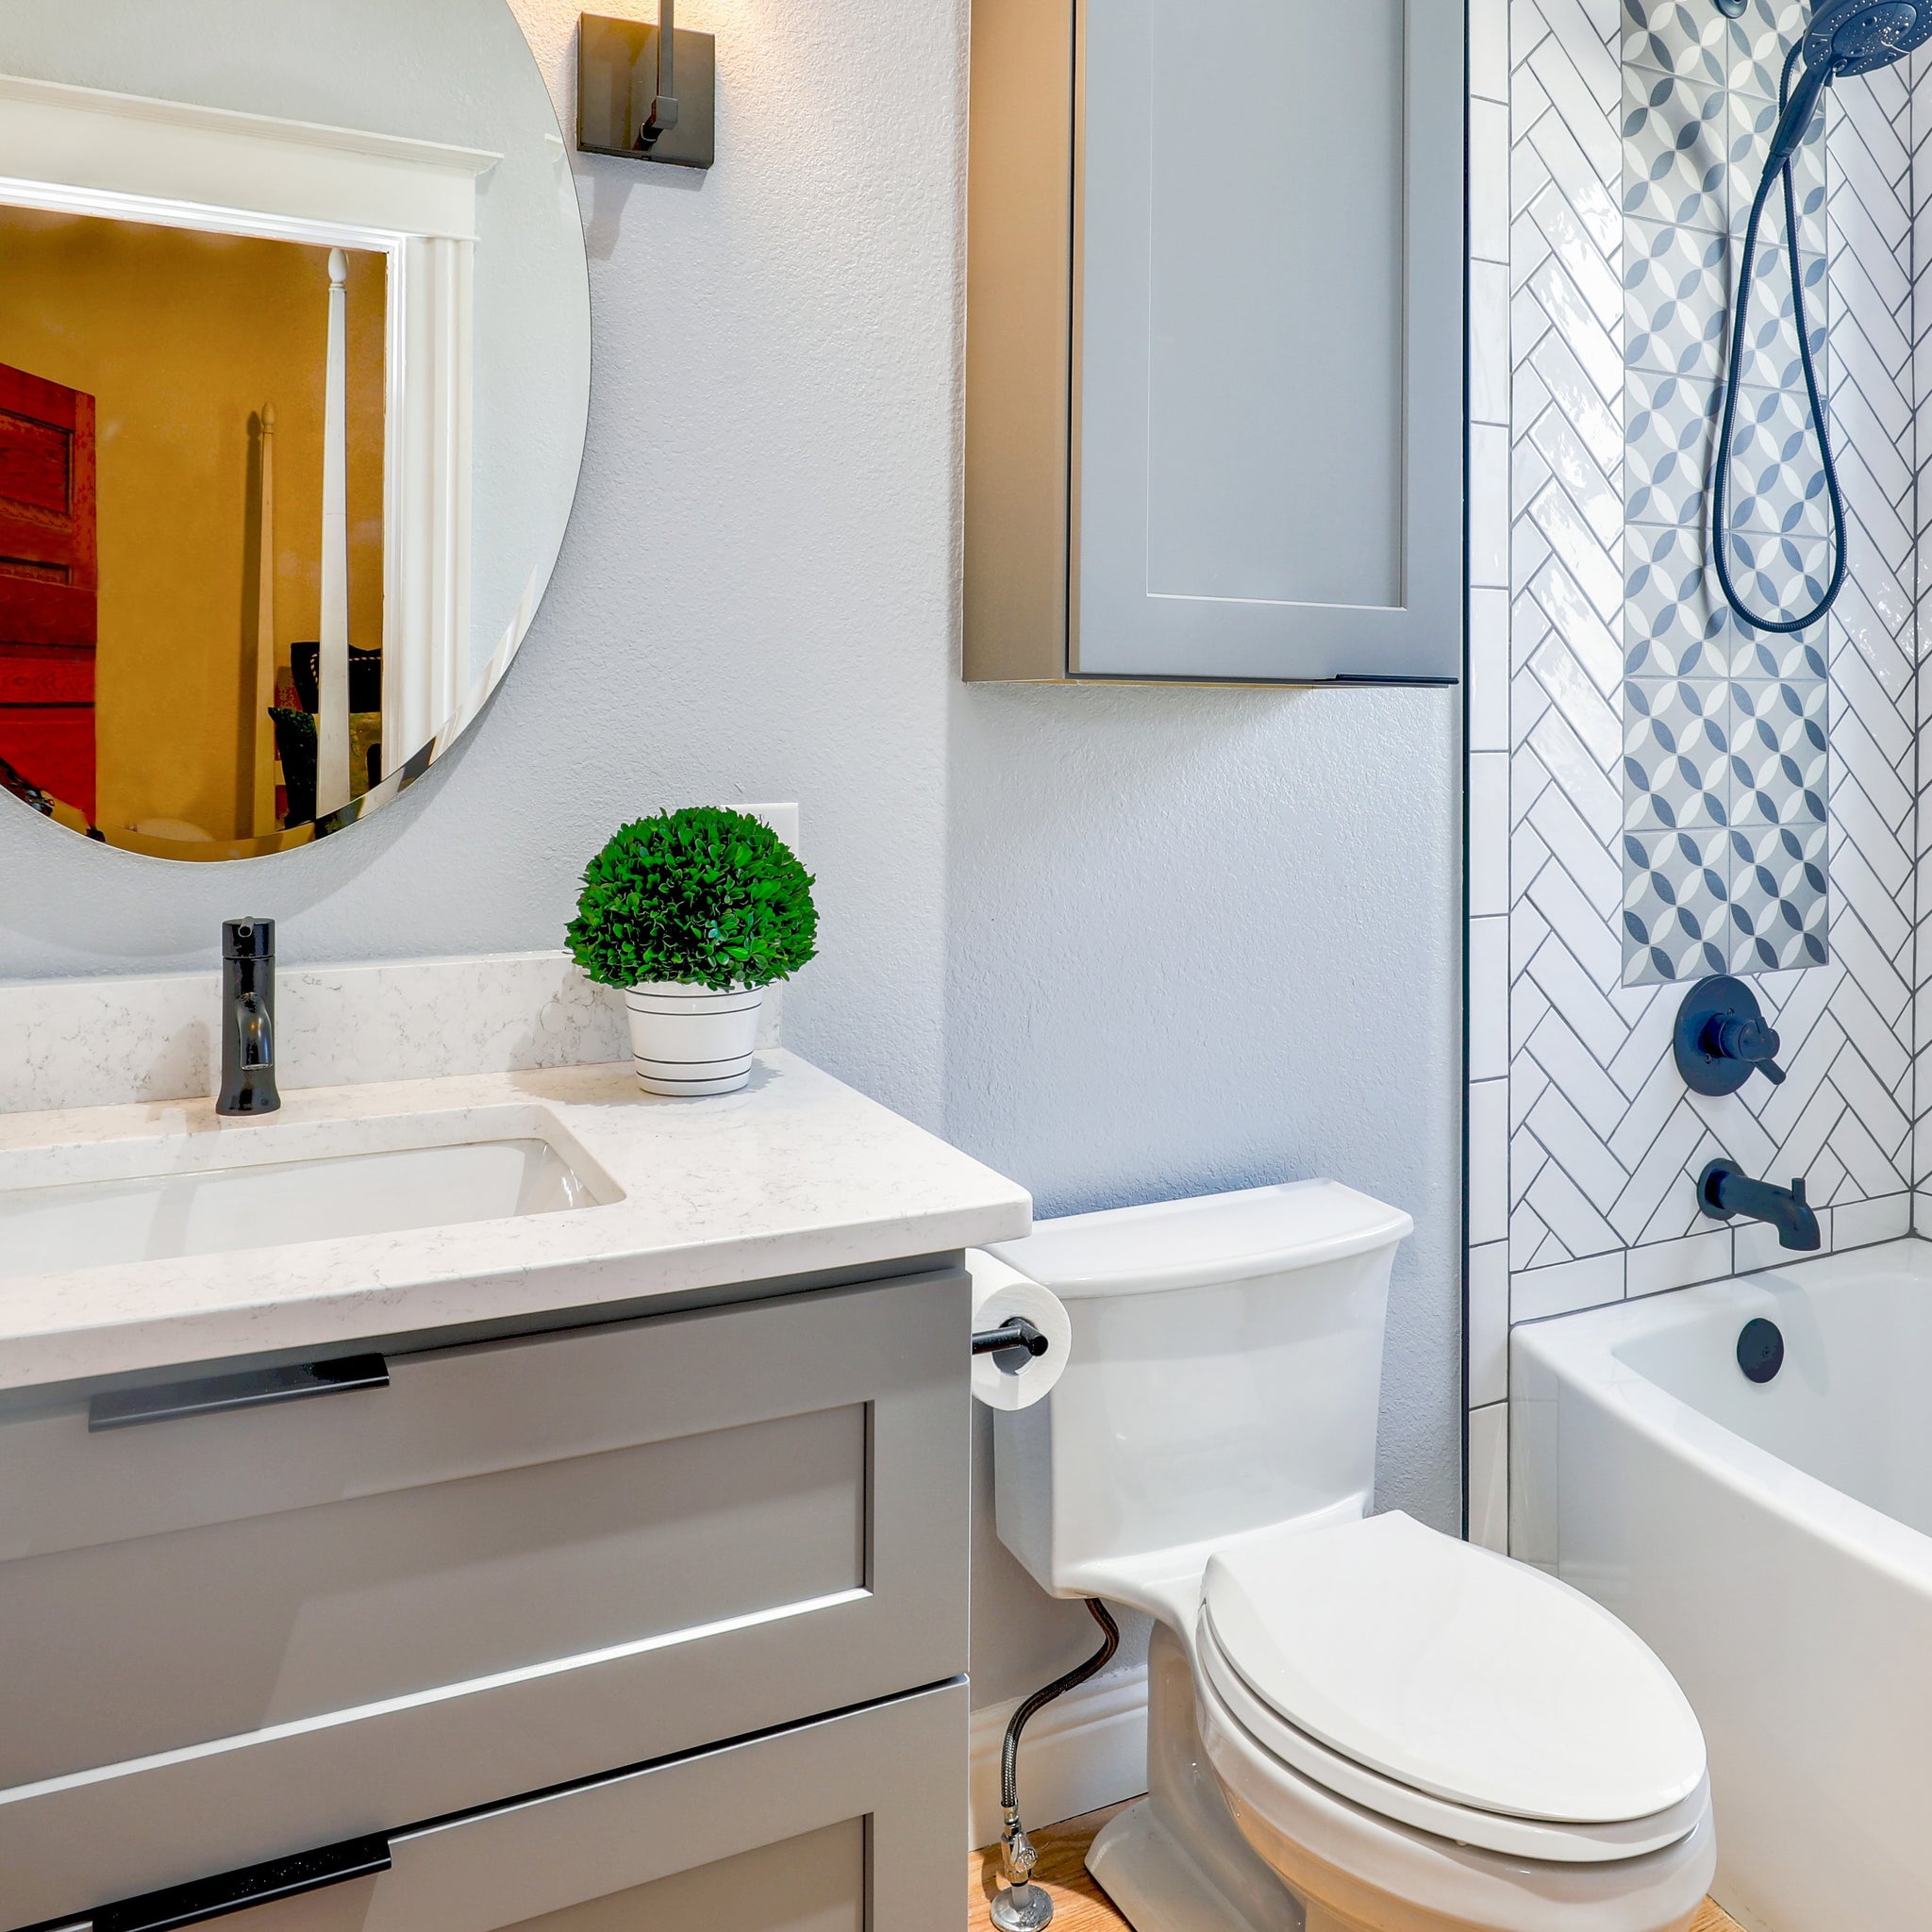 Bathroom Accessories Ideas: How to Make Your Bathroom Pop with Style